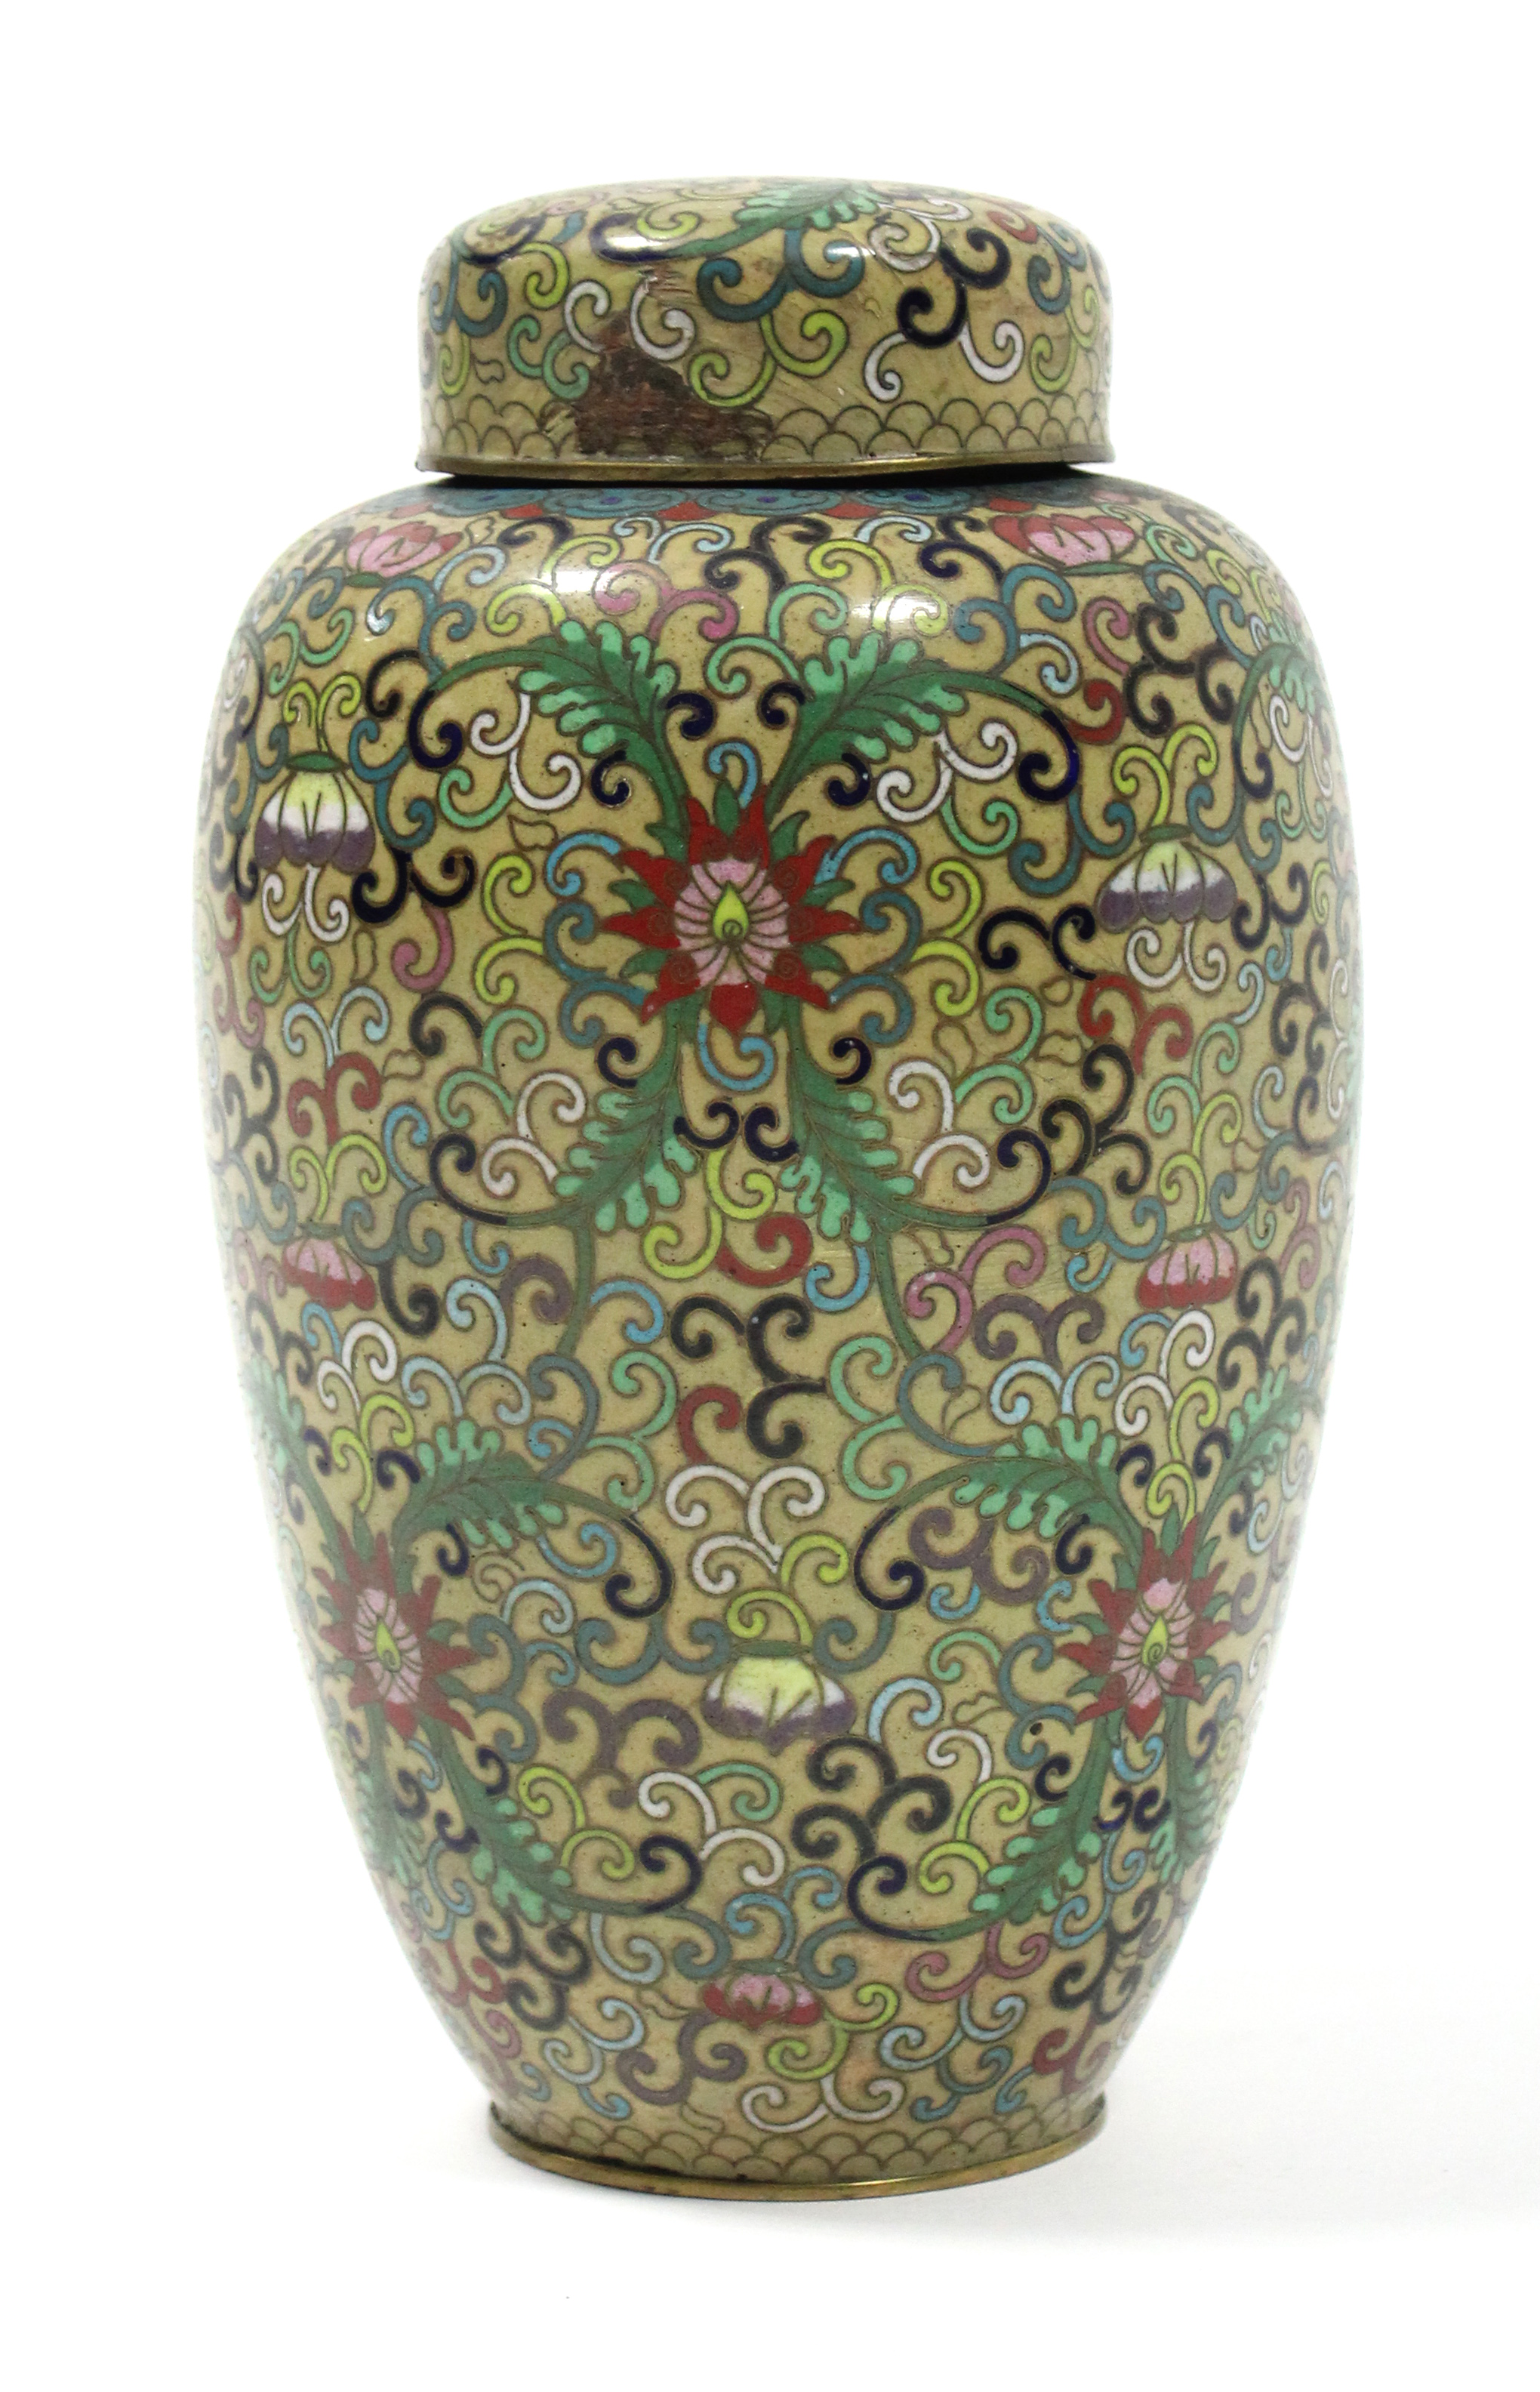 A late 19th/early 20th century Chinese cloisonné ovoid vase with stylised scrolling foliate design